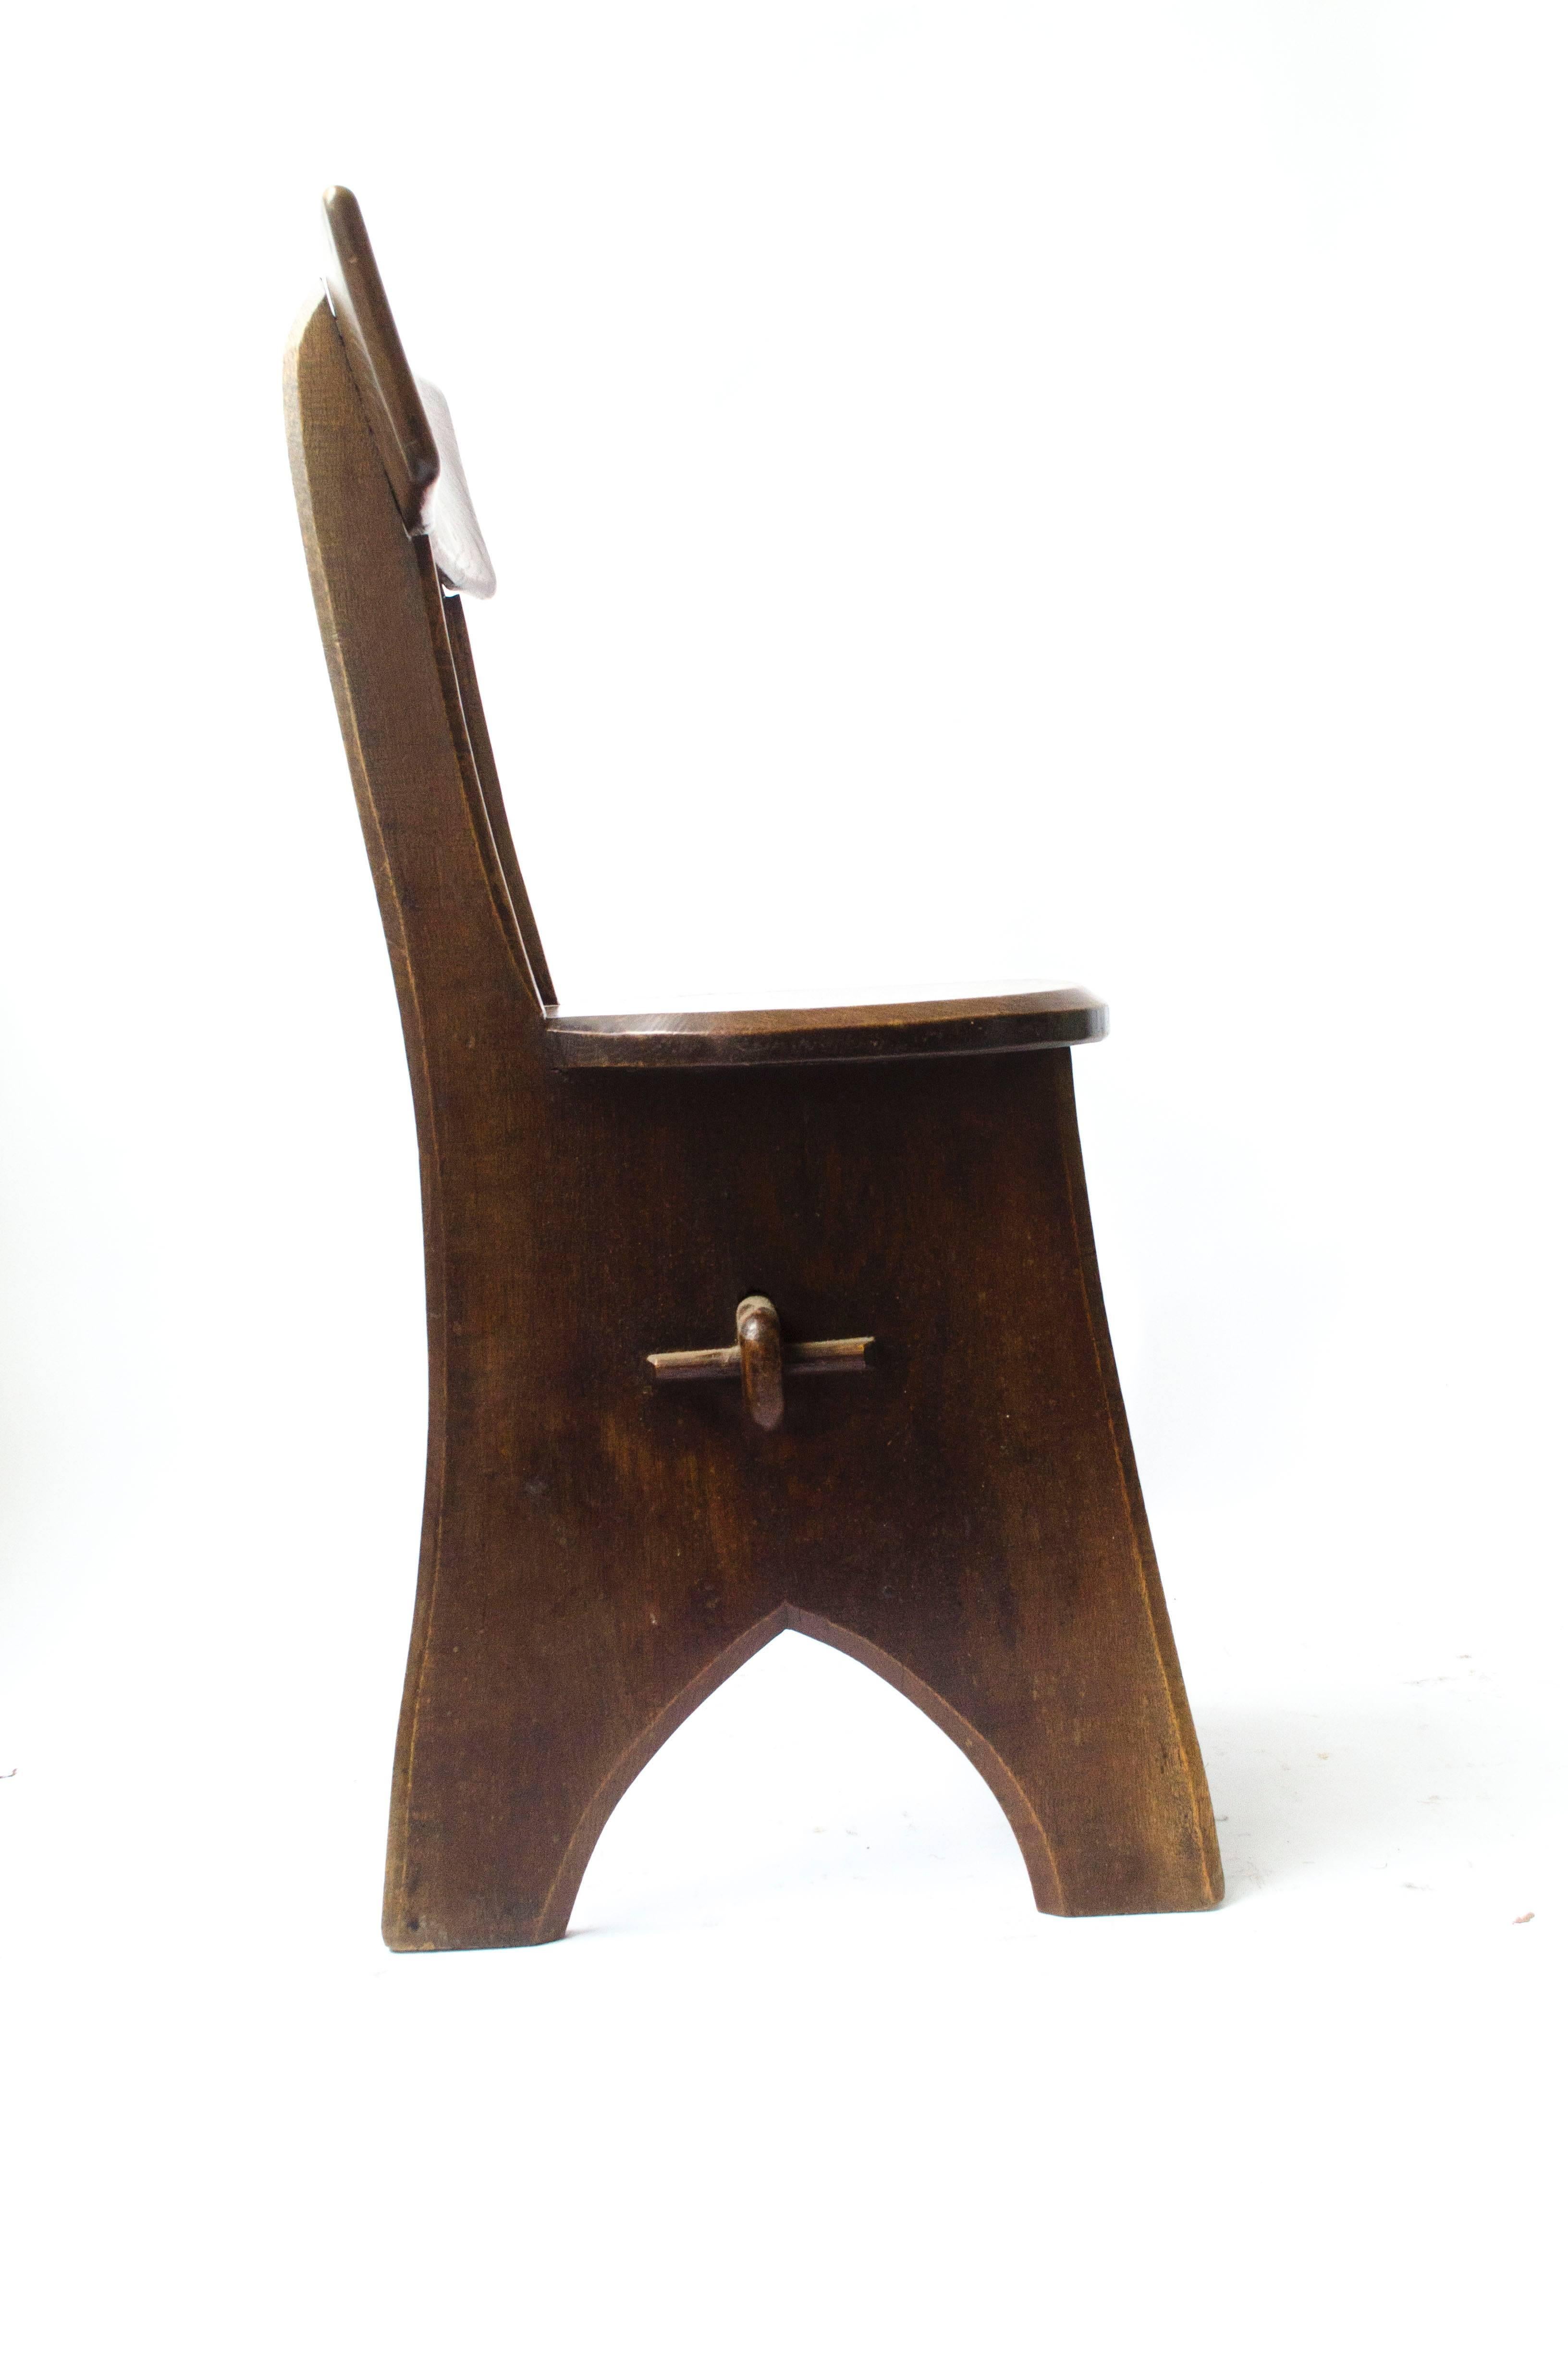 An Arts and Crafts oak chair with through pegged joints, in the style of Edward Welby Pugin, the eldest son of A W N Pugin.